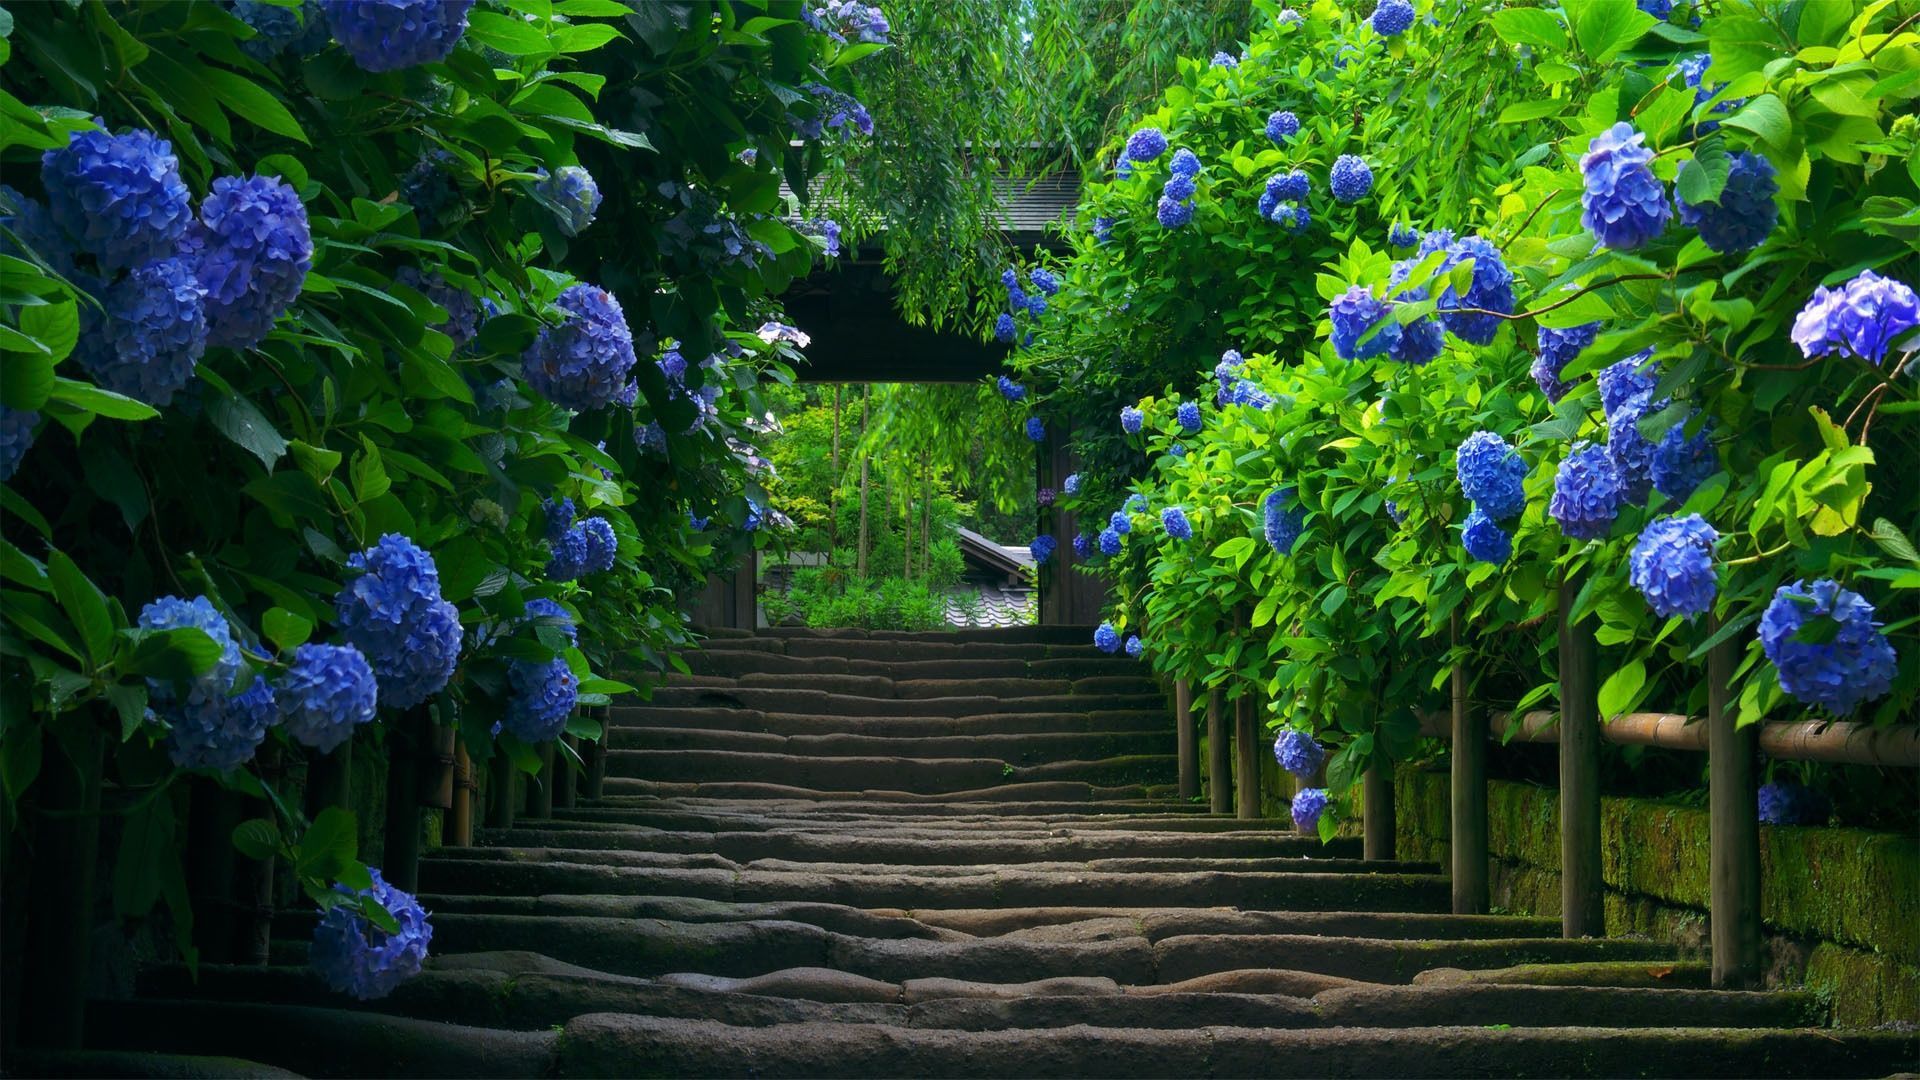  wallpapers and backgrounds Stairs blue flowers desktop wallpapers and